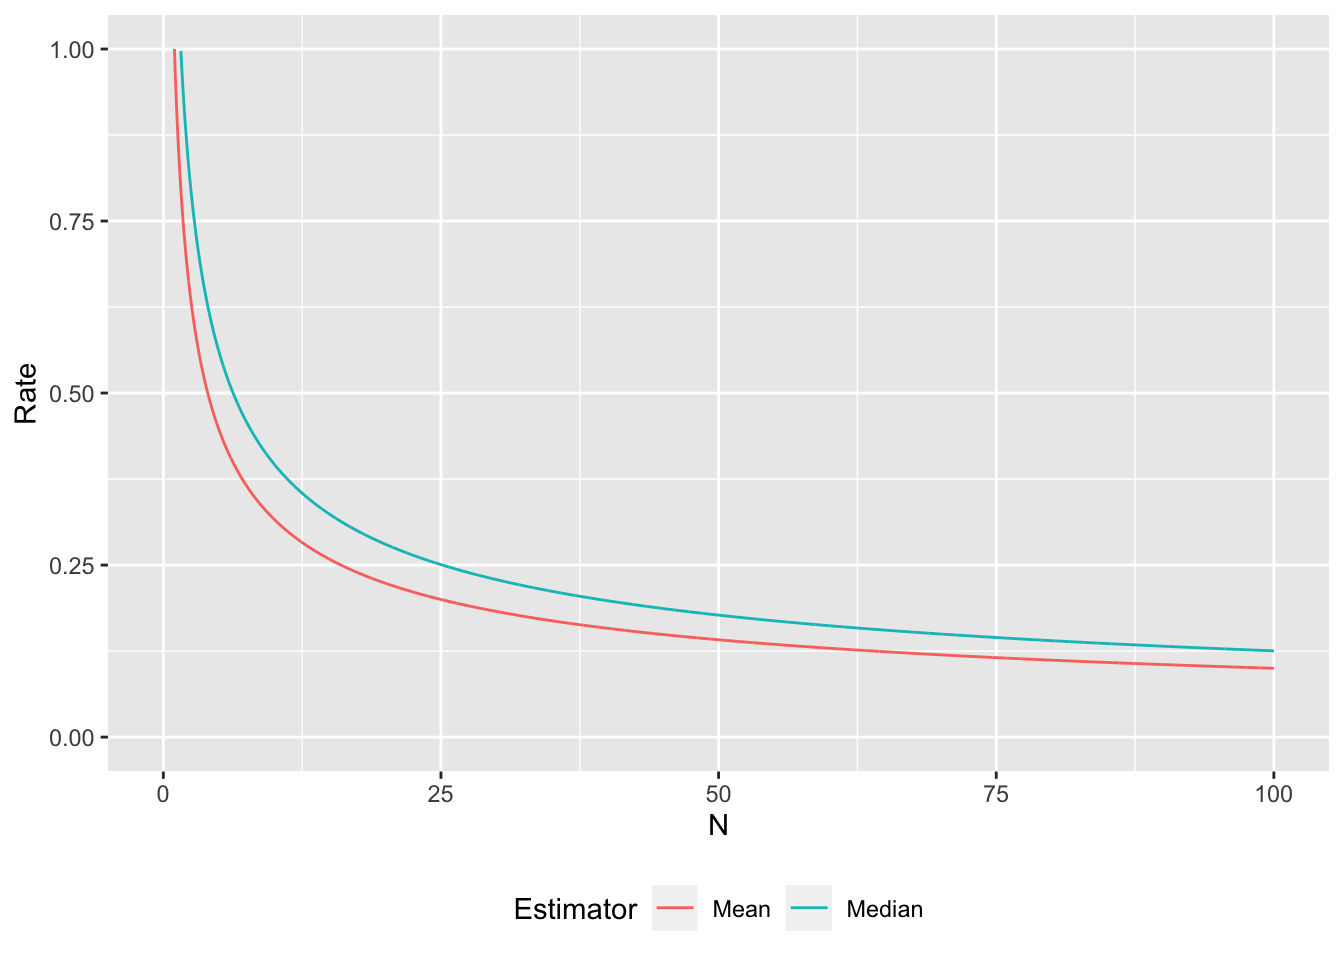 Simulated distribution of sample mean and median estimators for different sized samples.